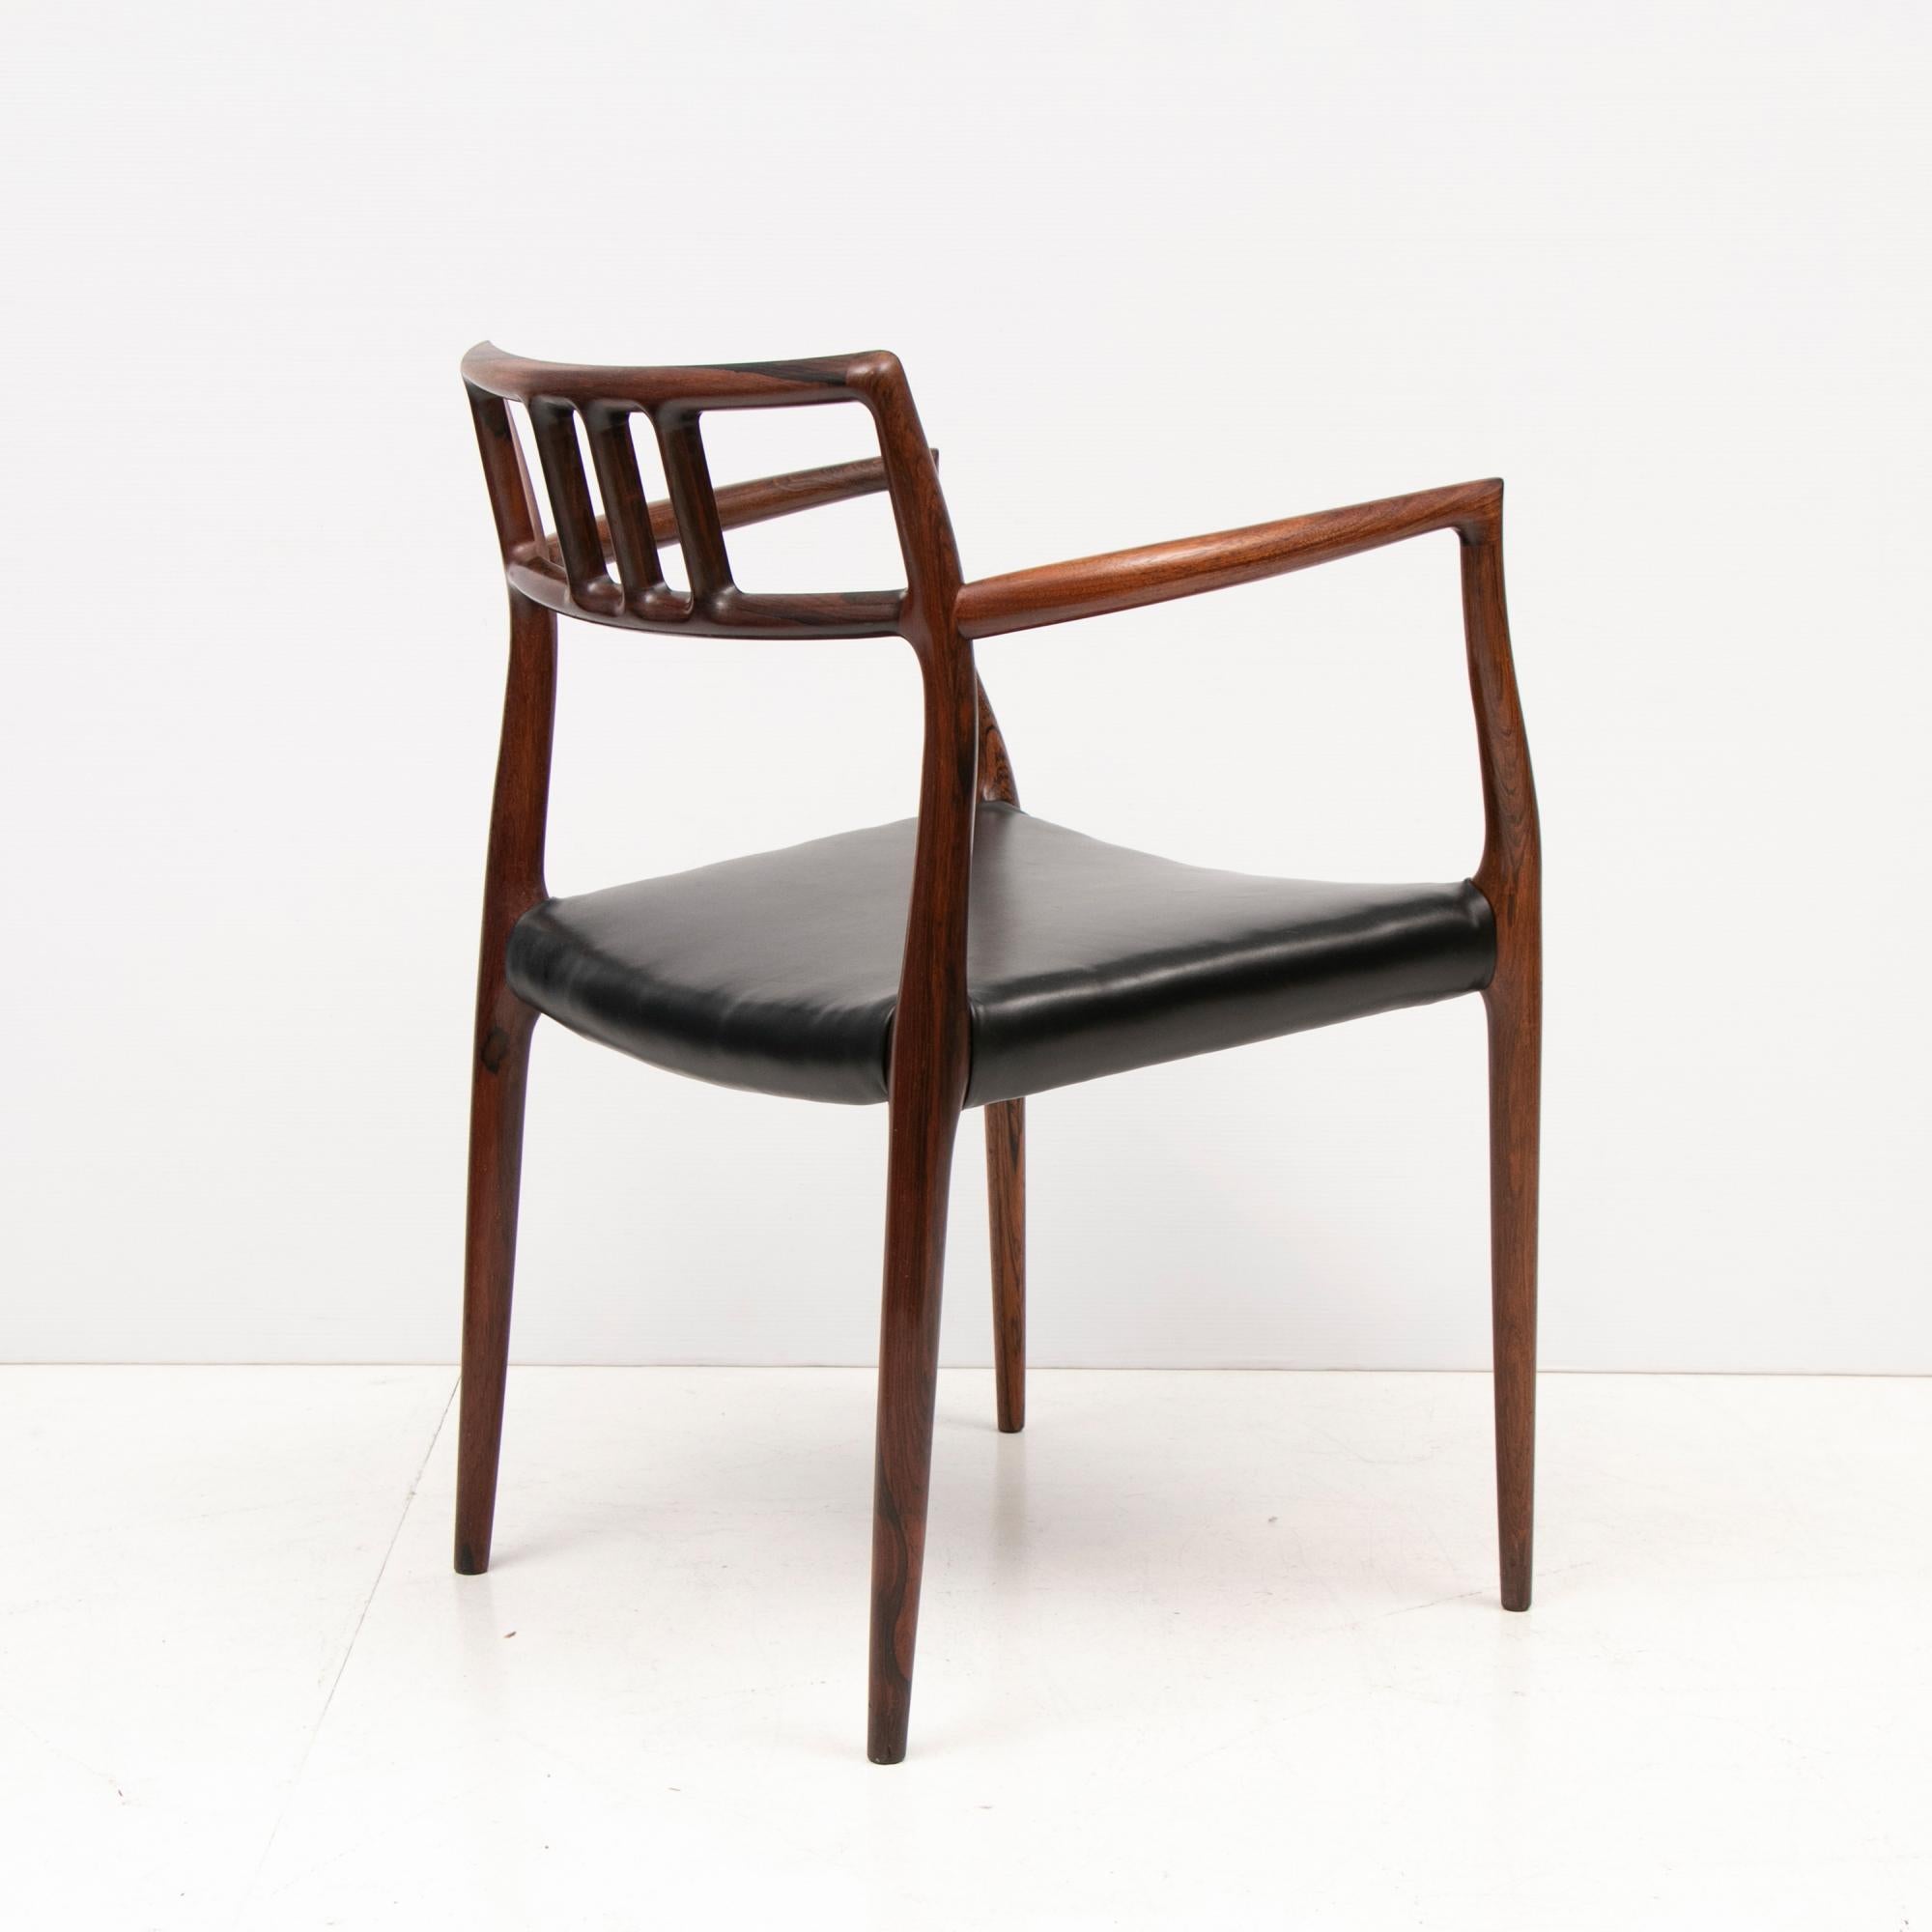 Danish Midcentury Rosewood and Leather Armchair Model 64 by Niels O. Møller In Good Condition For Sale In Farnham, Surrey